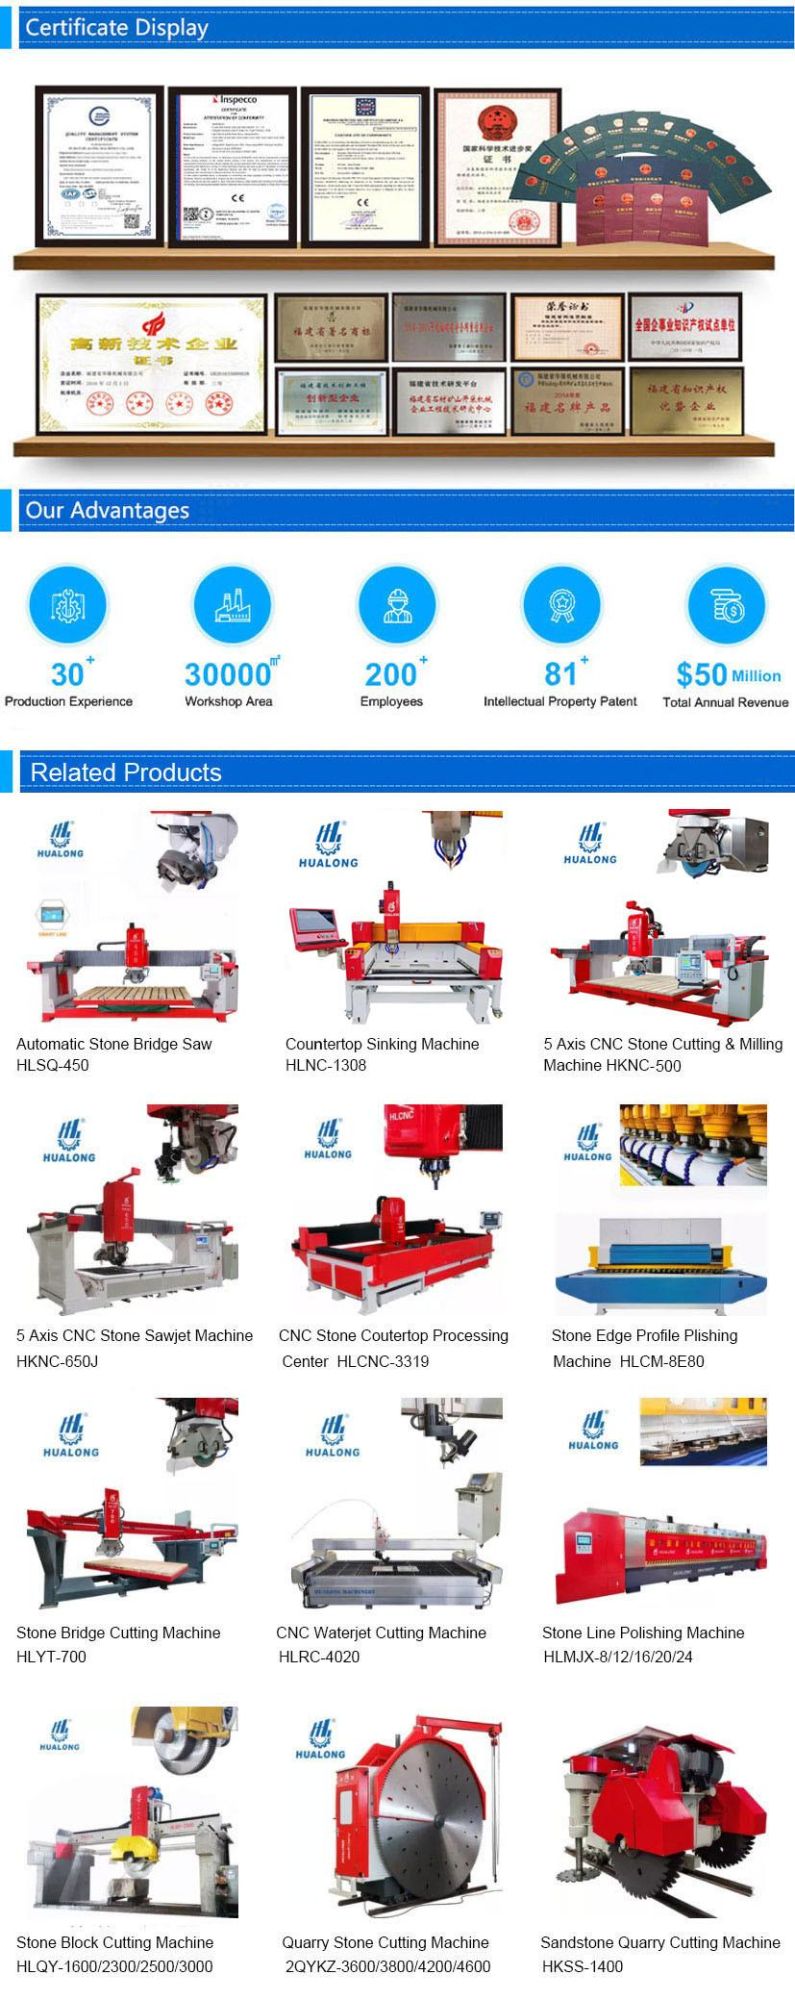 Hualong Stone Machinery CNC Marble Water Jet Cutting Machine Metal Glass Waterjet Cutting Machine Cutting with 5 Axis 45 Degrees Mitre Precision Cutting